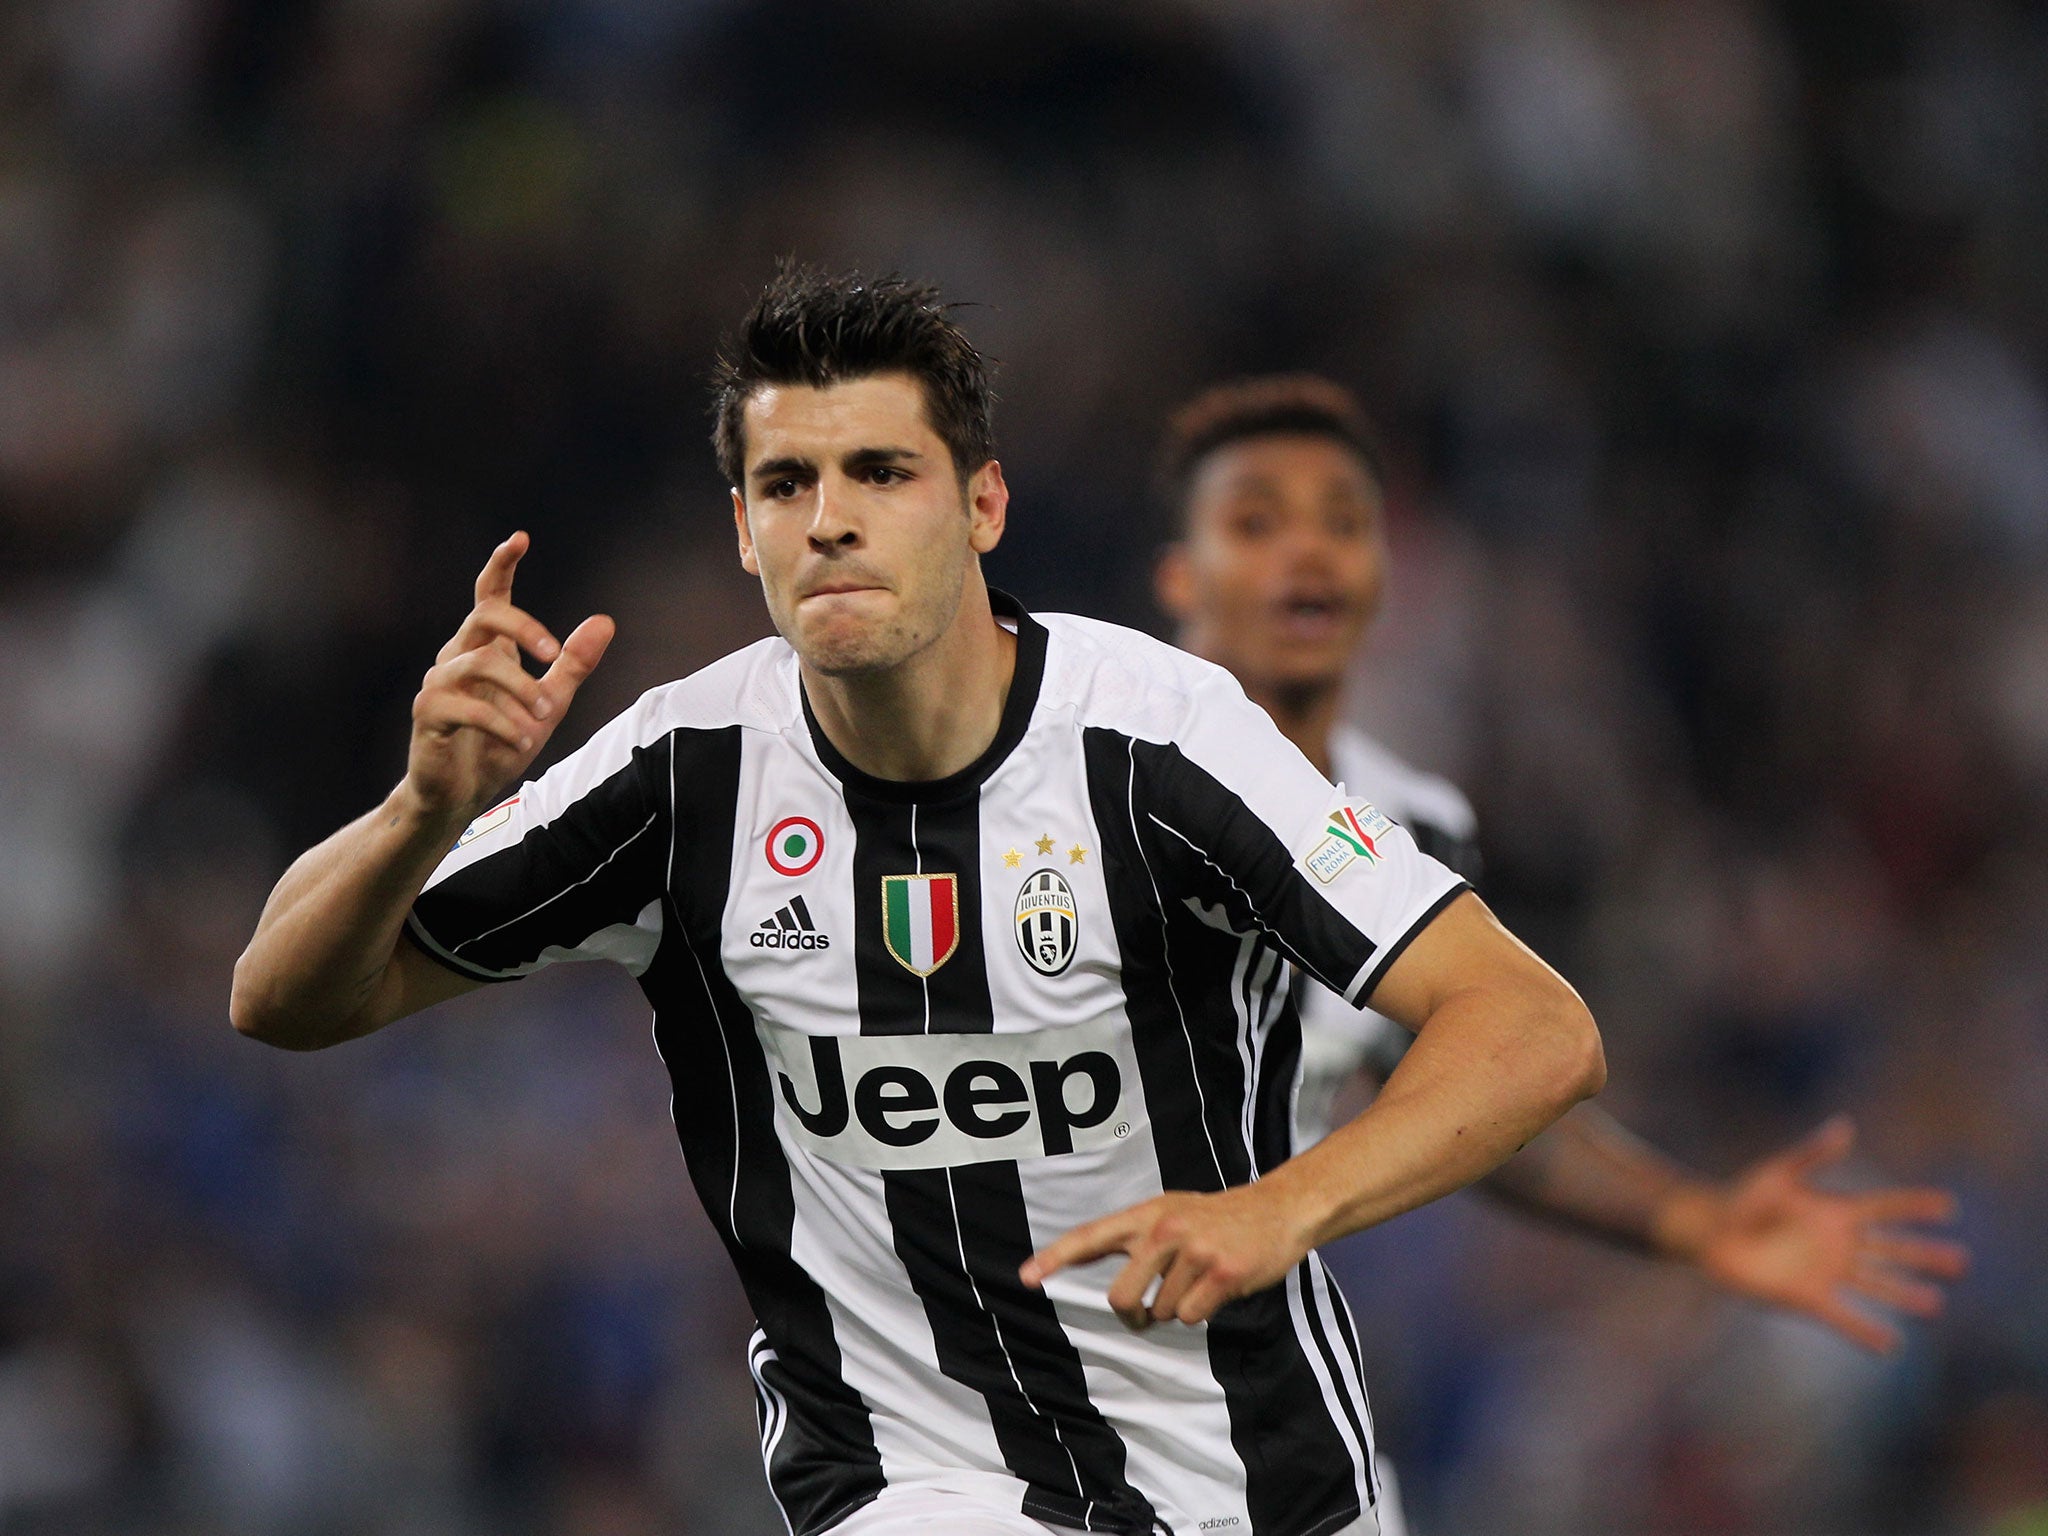 Alvaro Morata excelled during his time at Juve